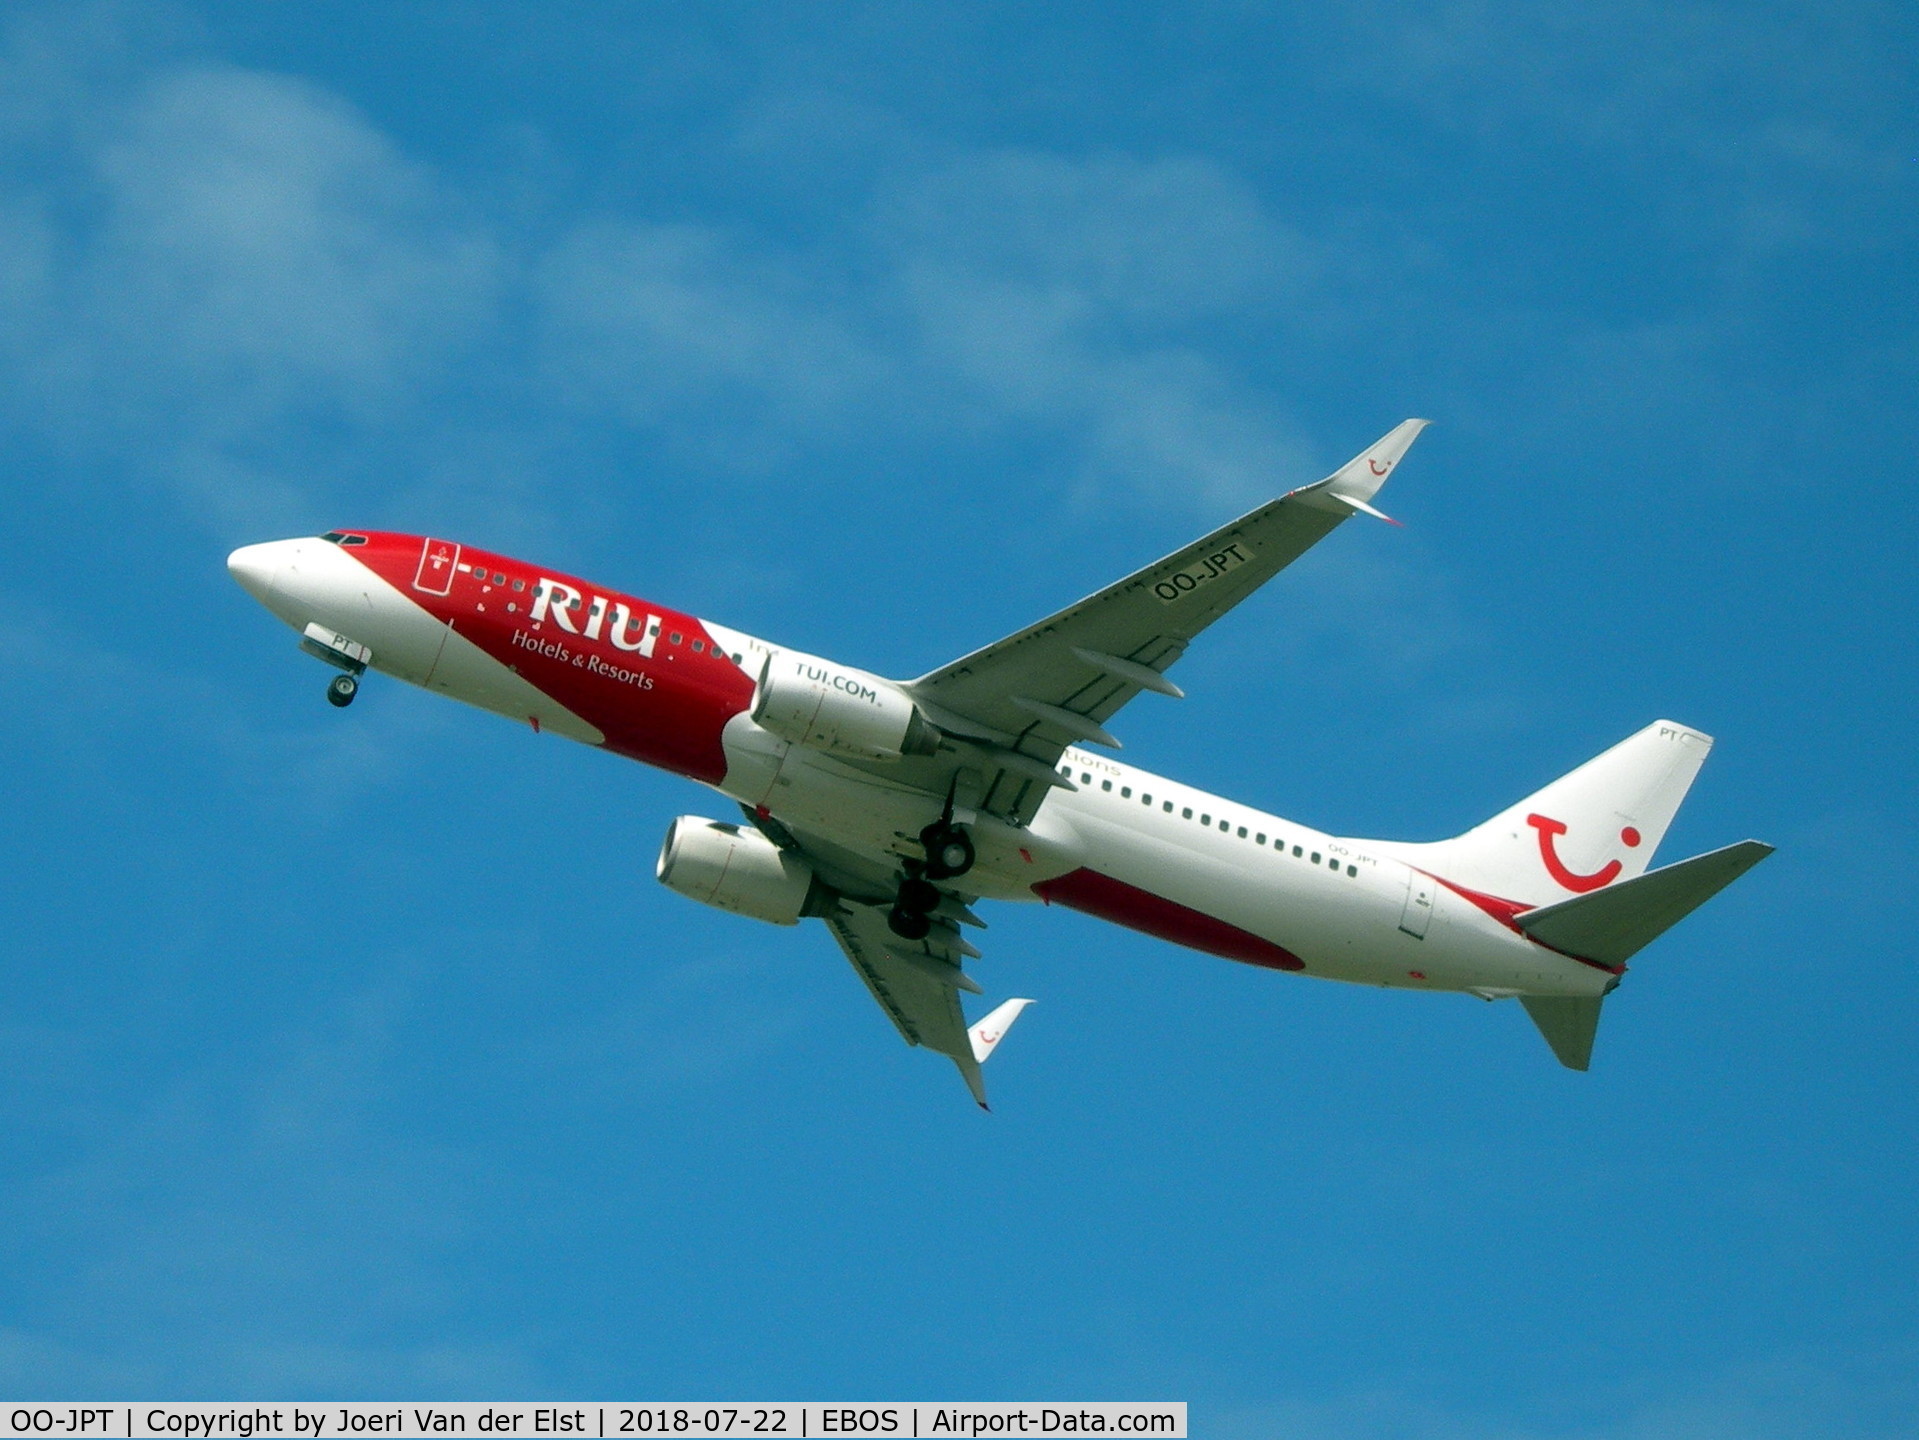 OO-JPT, 2007 Boeing 737-8K5 C/N 34691, Just after take-off rwy 26 in its new RIU hotels livery